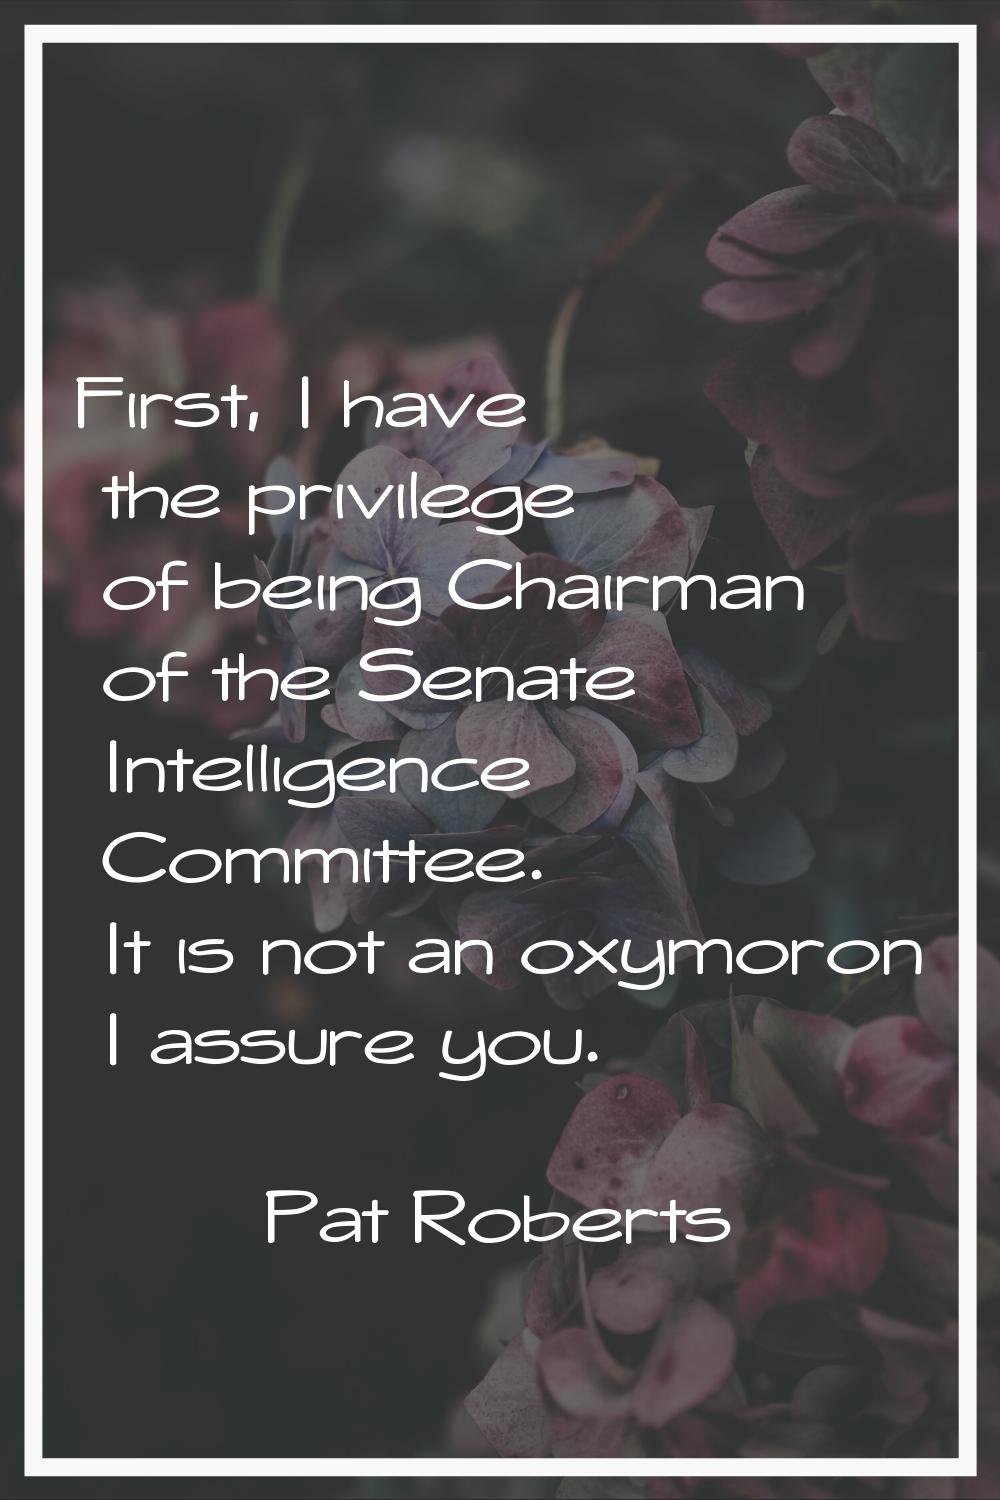 First, I have the privilege of being Chairman of the Senate Intelligence Committee. It is not an ox